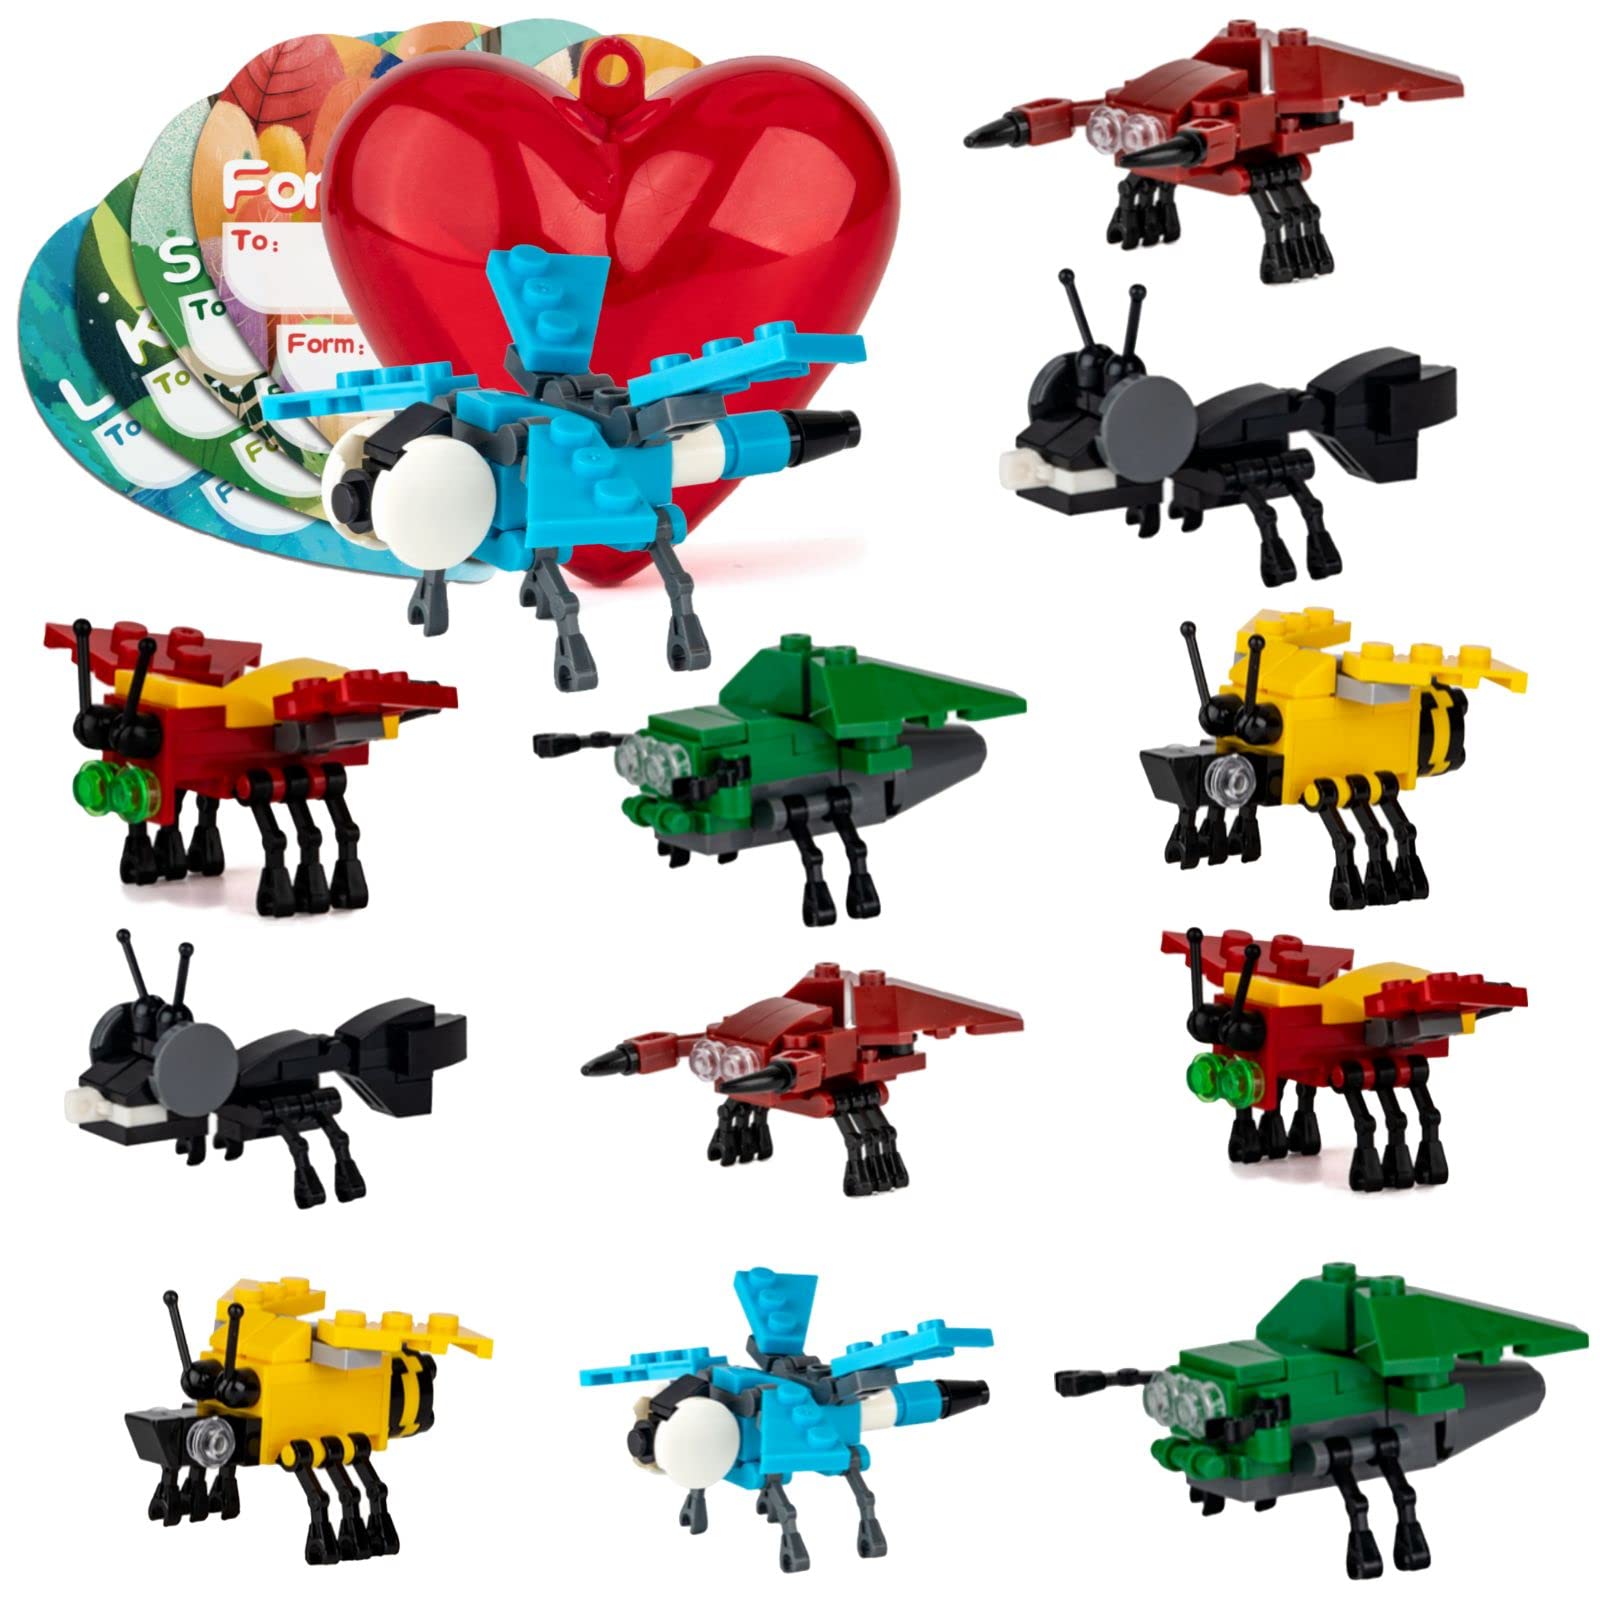 Saparlo 24pcs Insect Mini Building Blocks Set for Kids Ages 3+ w/ Valentine Cards & Hearts, Mini Animal Building Blocks Toys, Valentine's Day Gift for Kids Boys Girls, 6 Designs*4, Party Favors